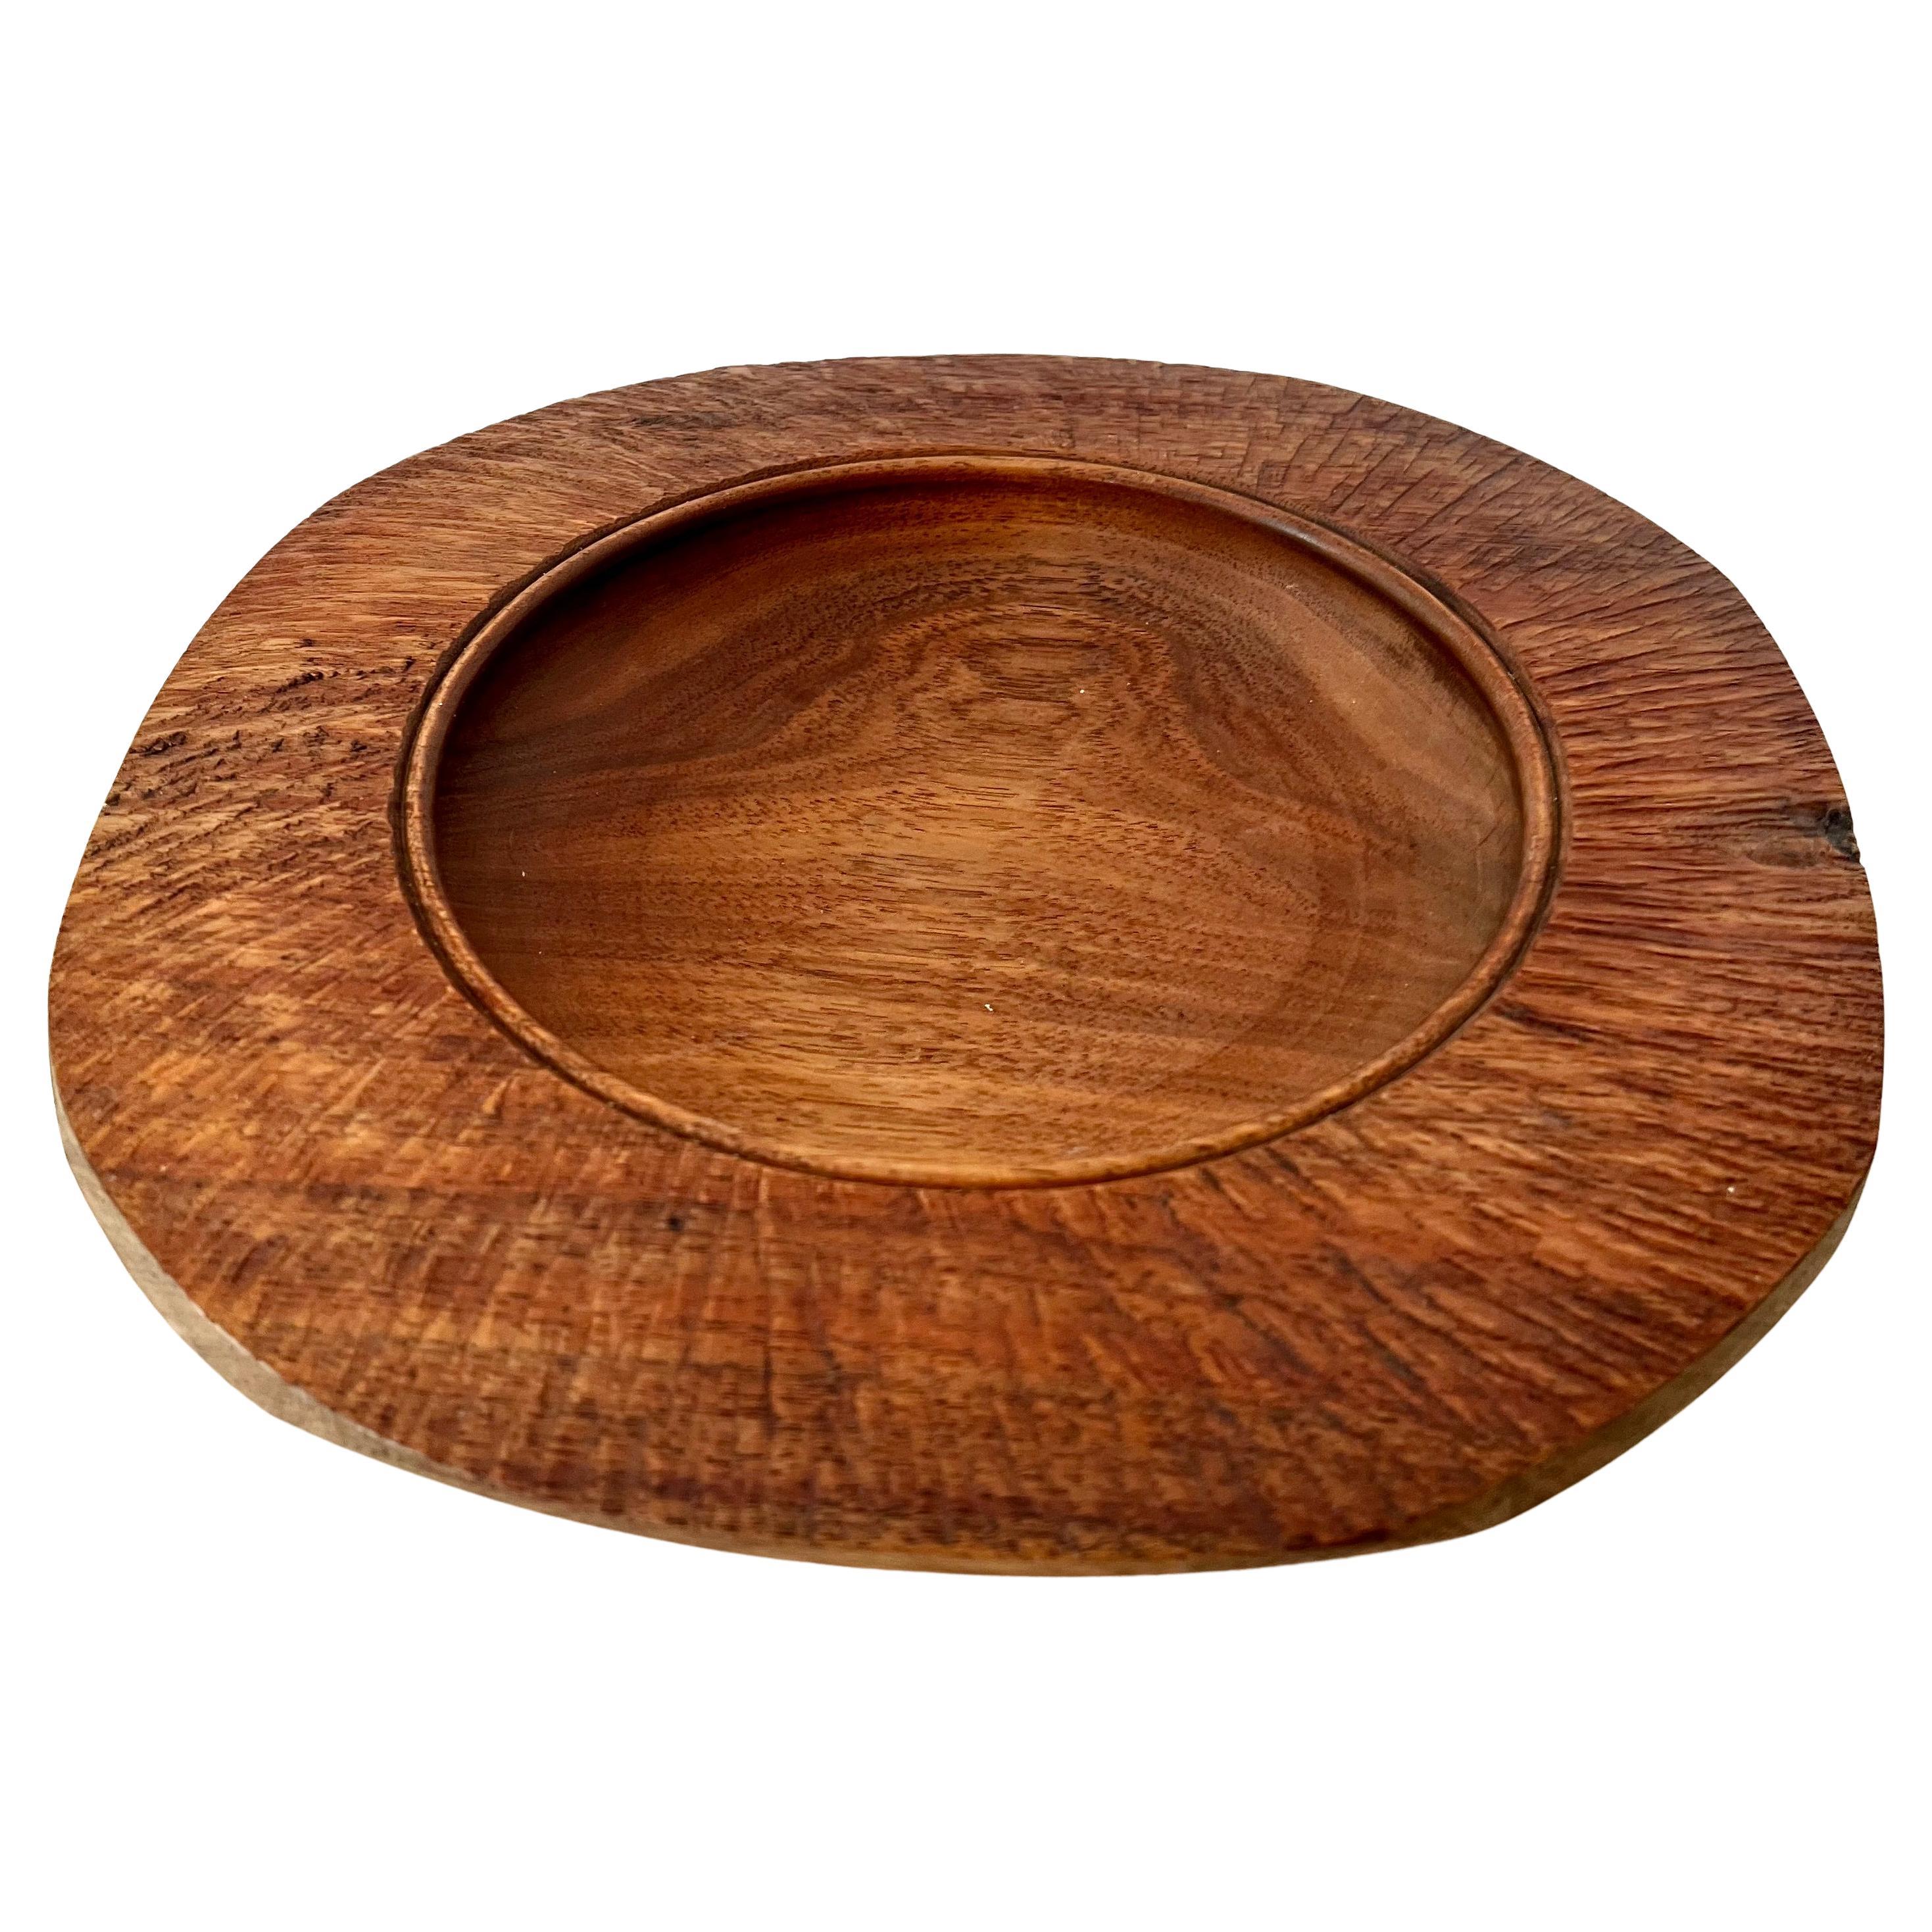 Signed Handmade New Zealand Blackwood Bowl with Rough Hewn Edges For Sale